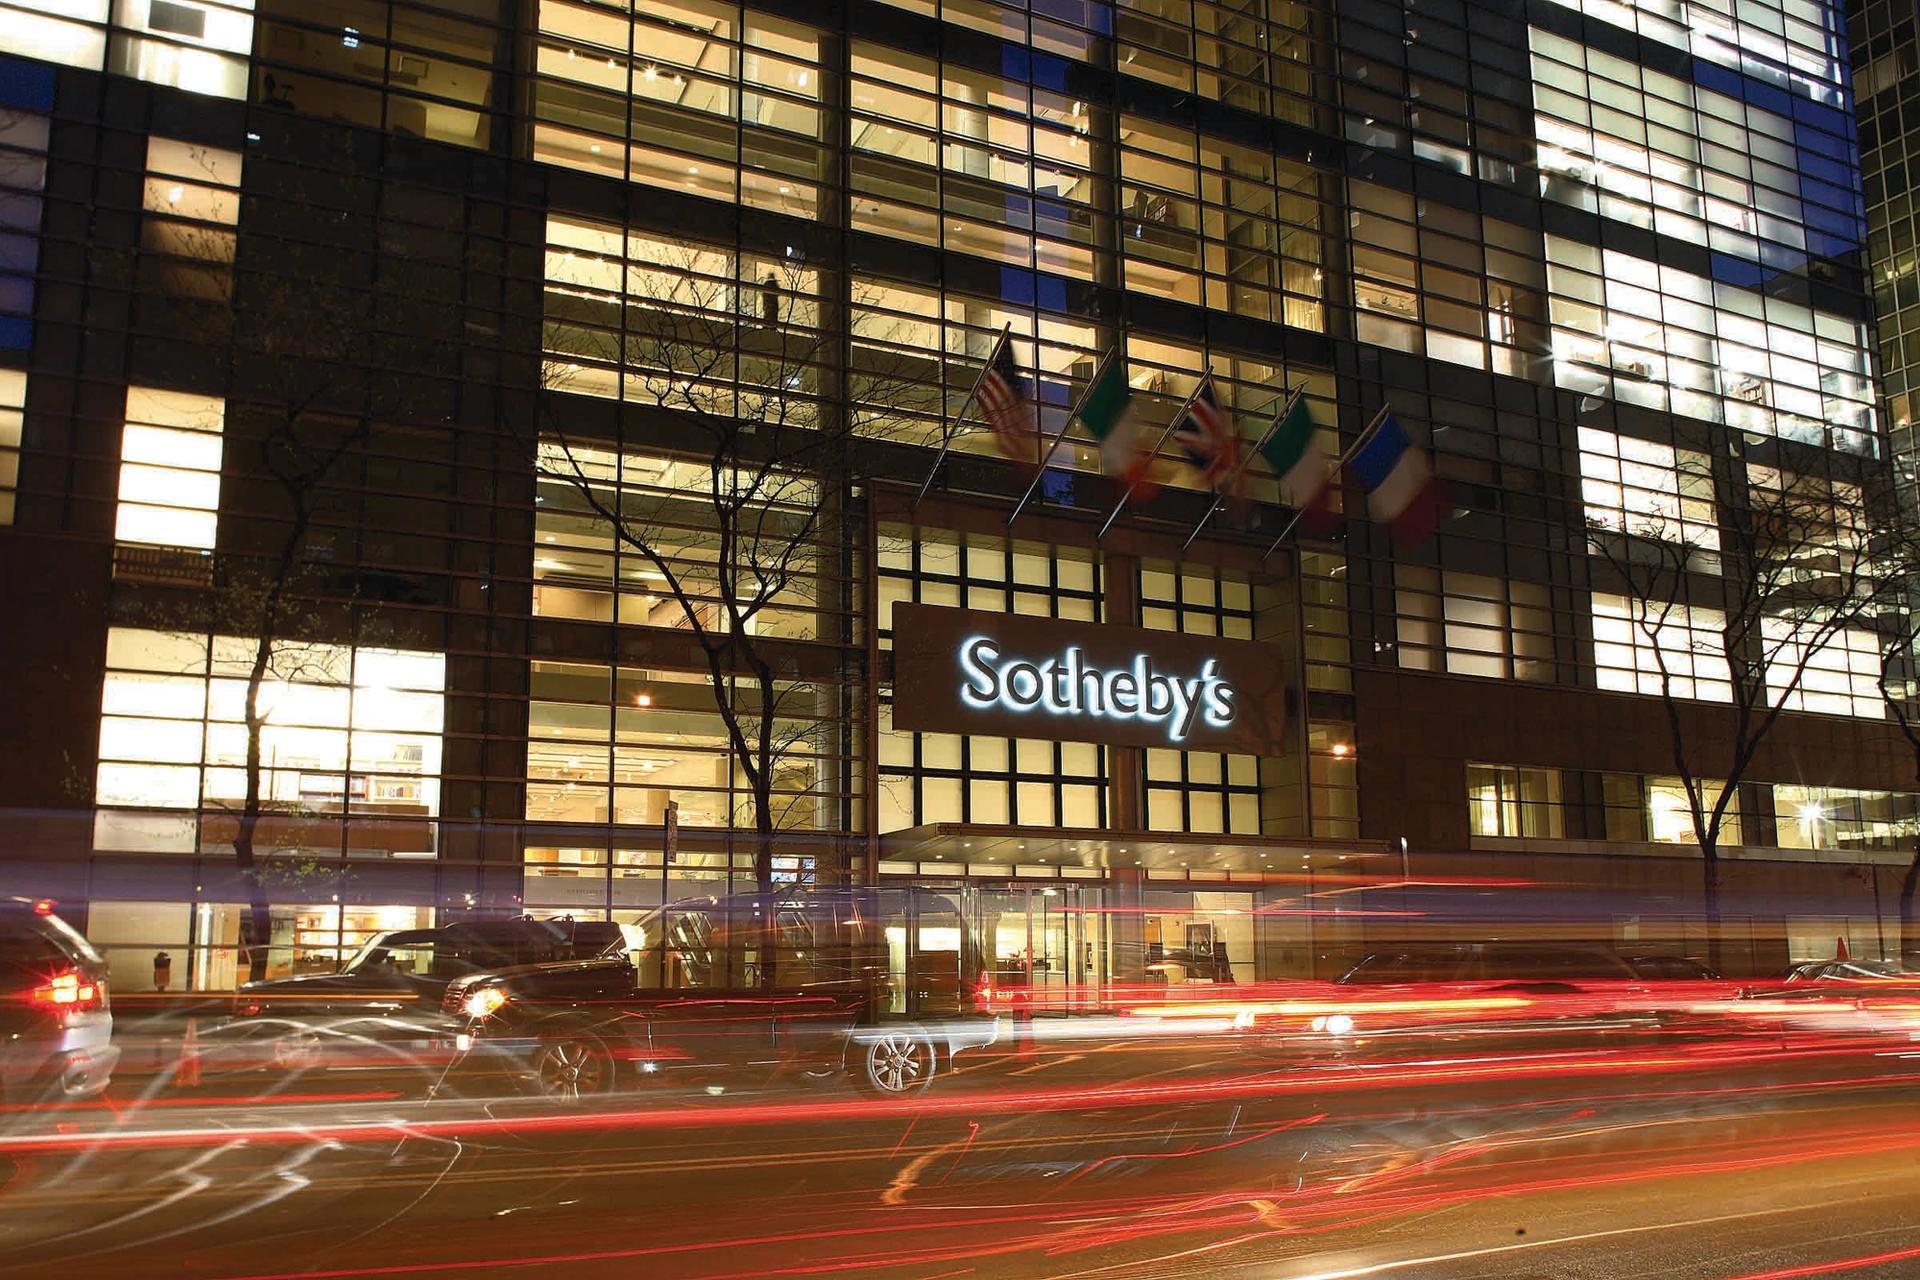 Sotheby's New York headquarters Courtesy of Sotheby’s